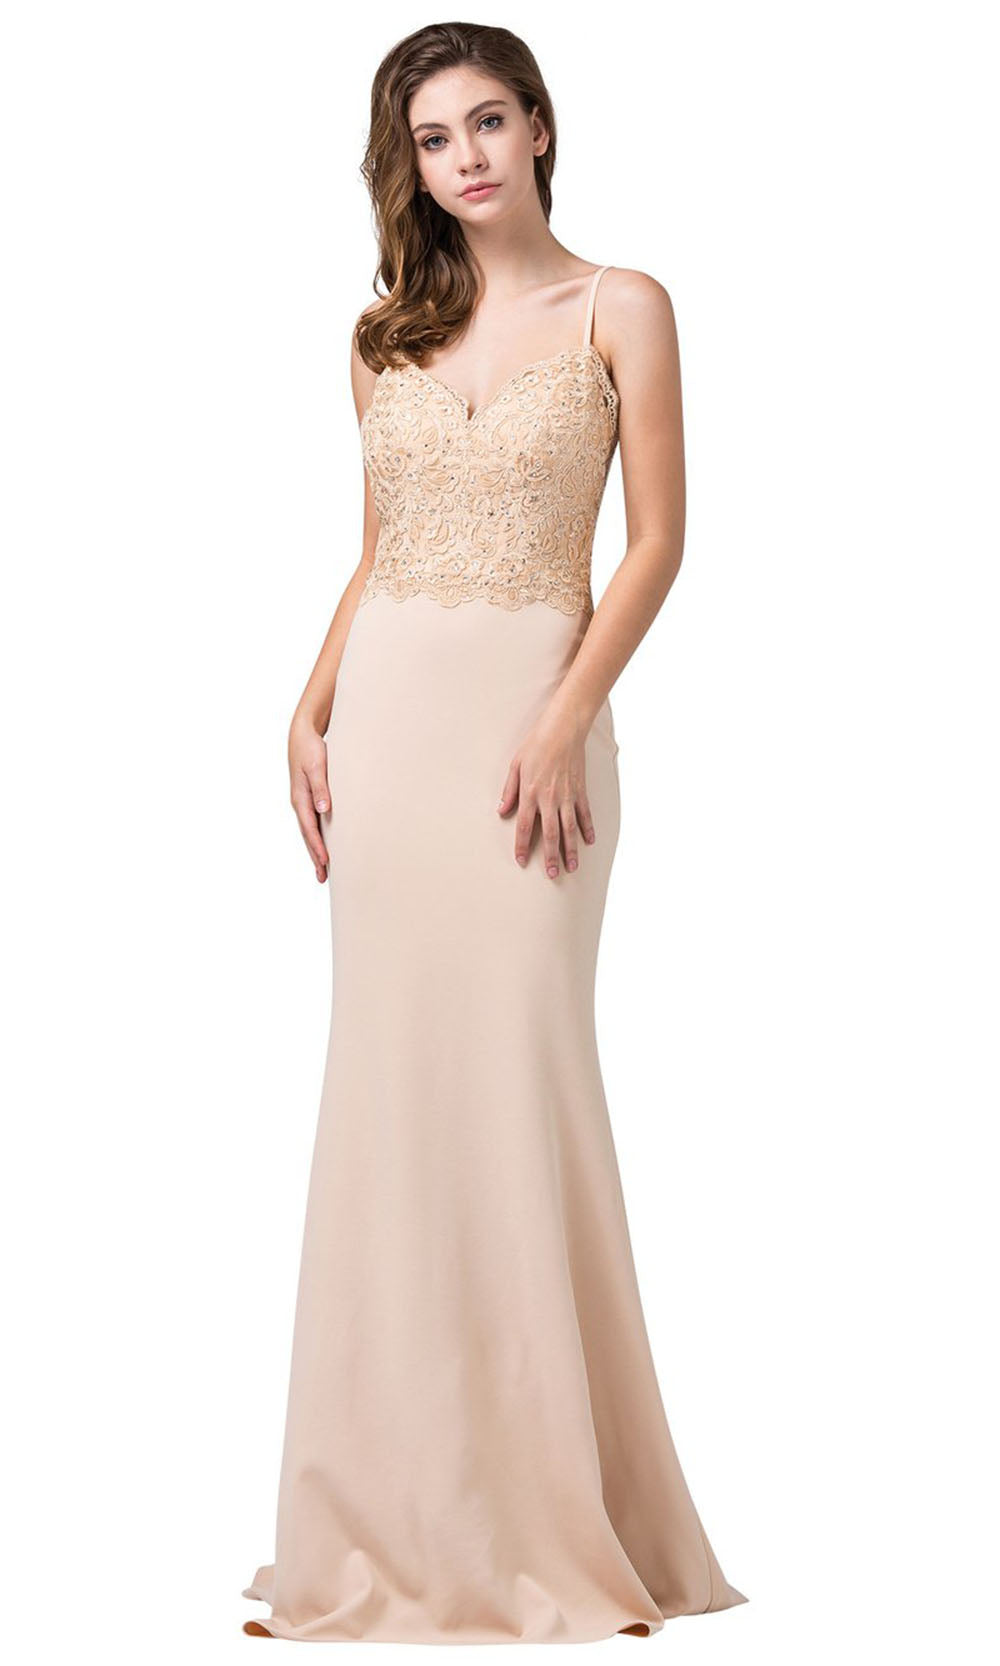 Dancing Queen - 2620 Embroidered V Neck Trumpet Dress With Train In Neutral